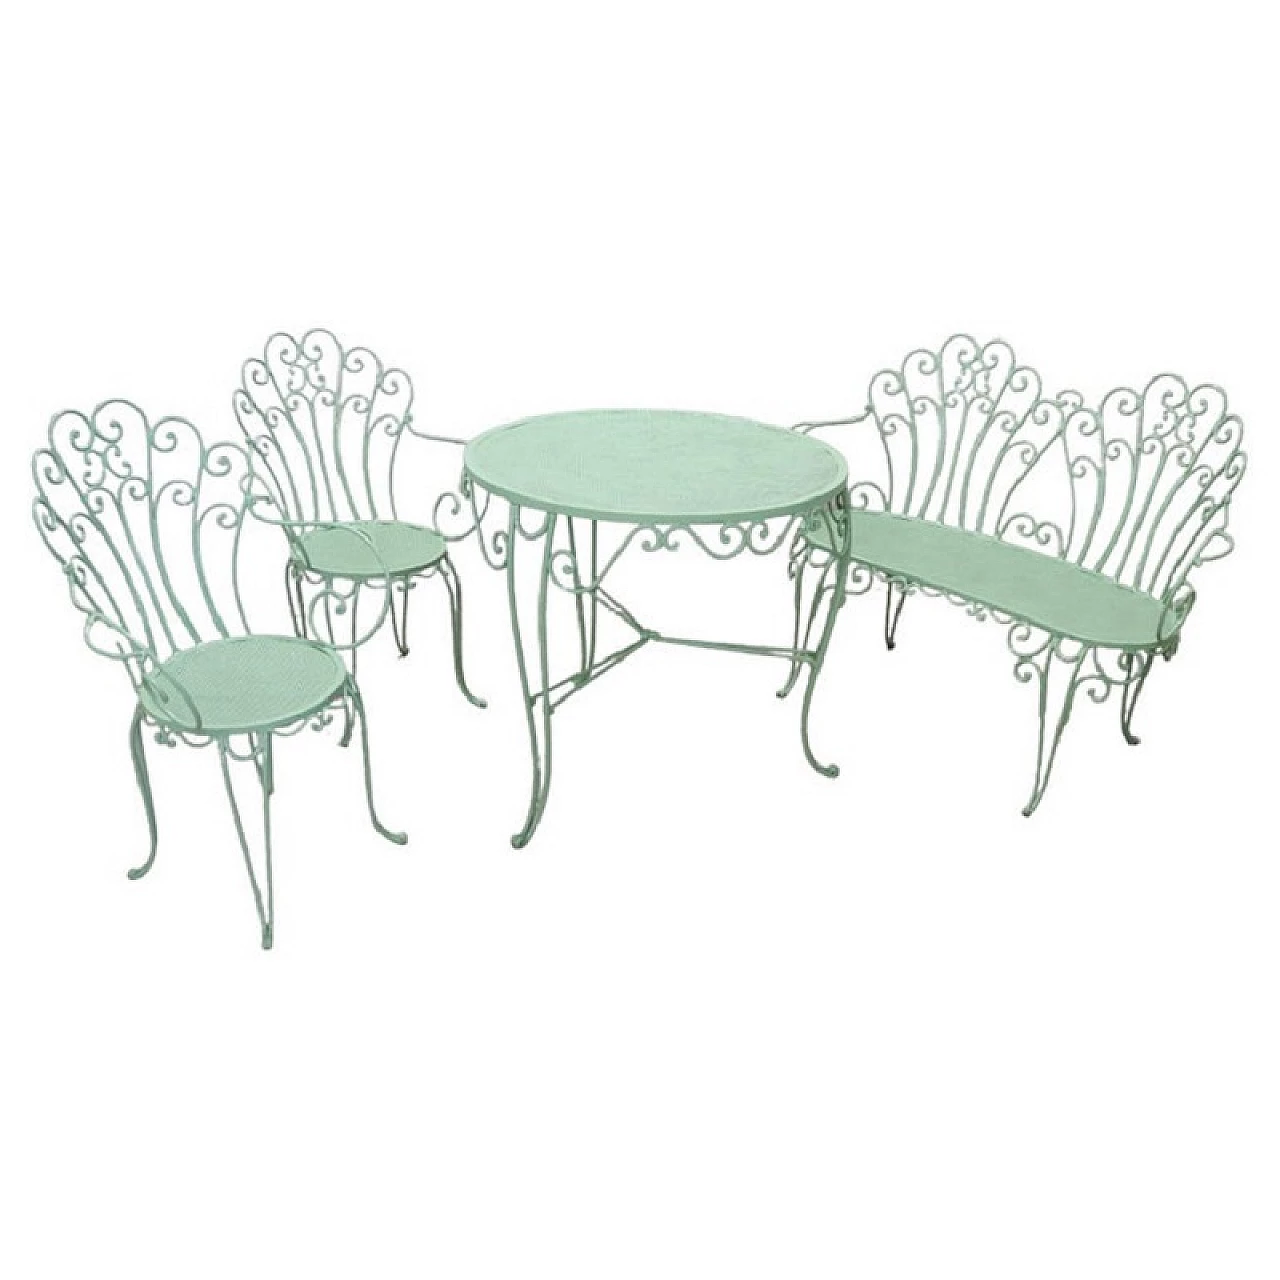 Pair of chairs, sofa and garden table in green lacquered iron, 1920s 1